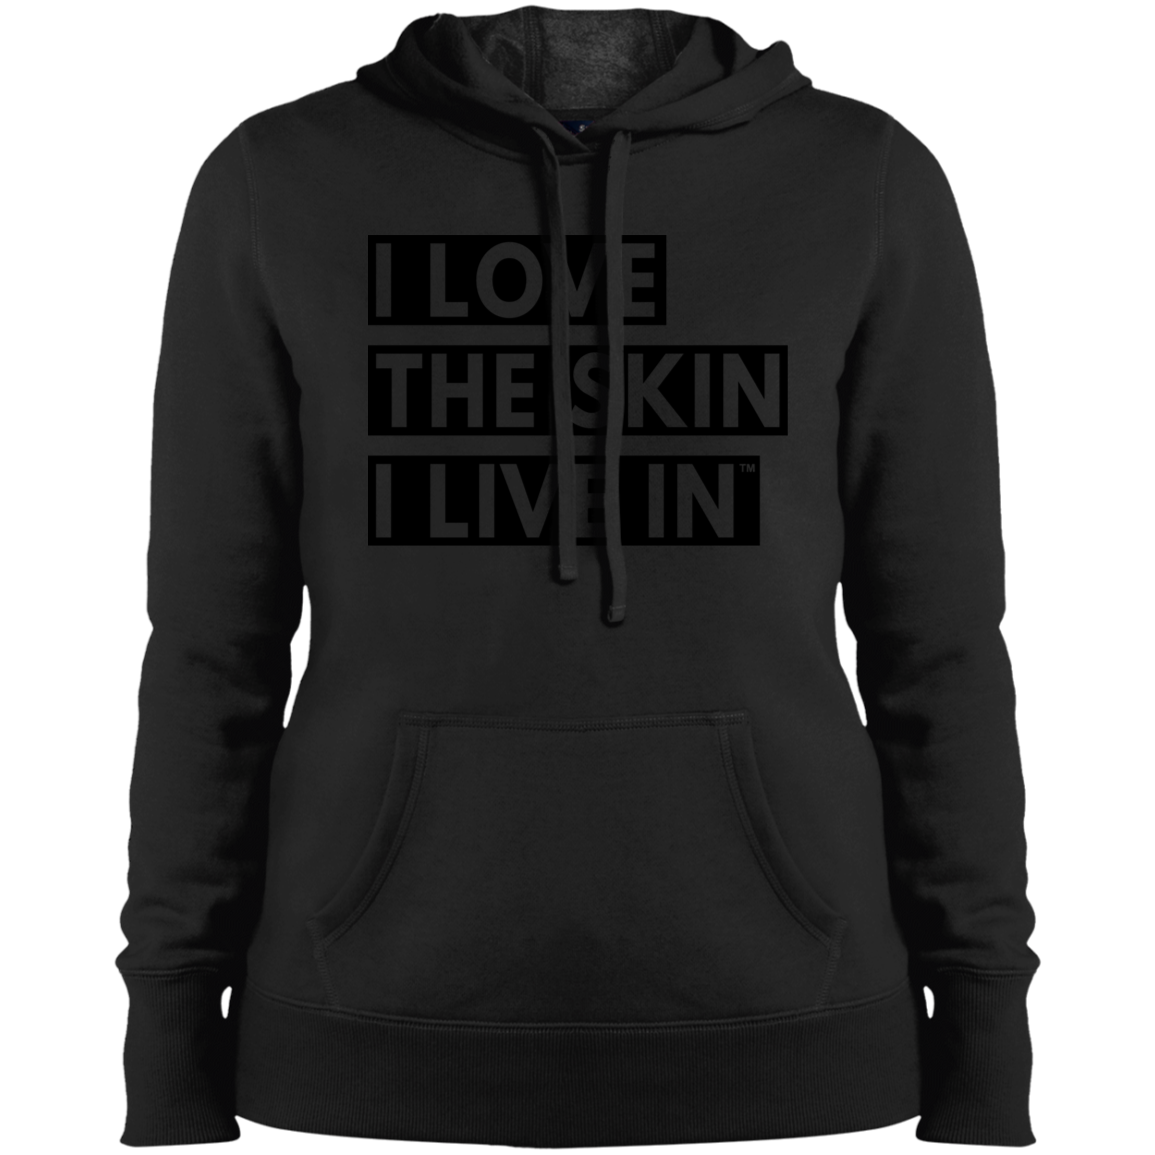 I Love The Skin I Live In™ Women's Pullover Hoodie